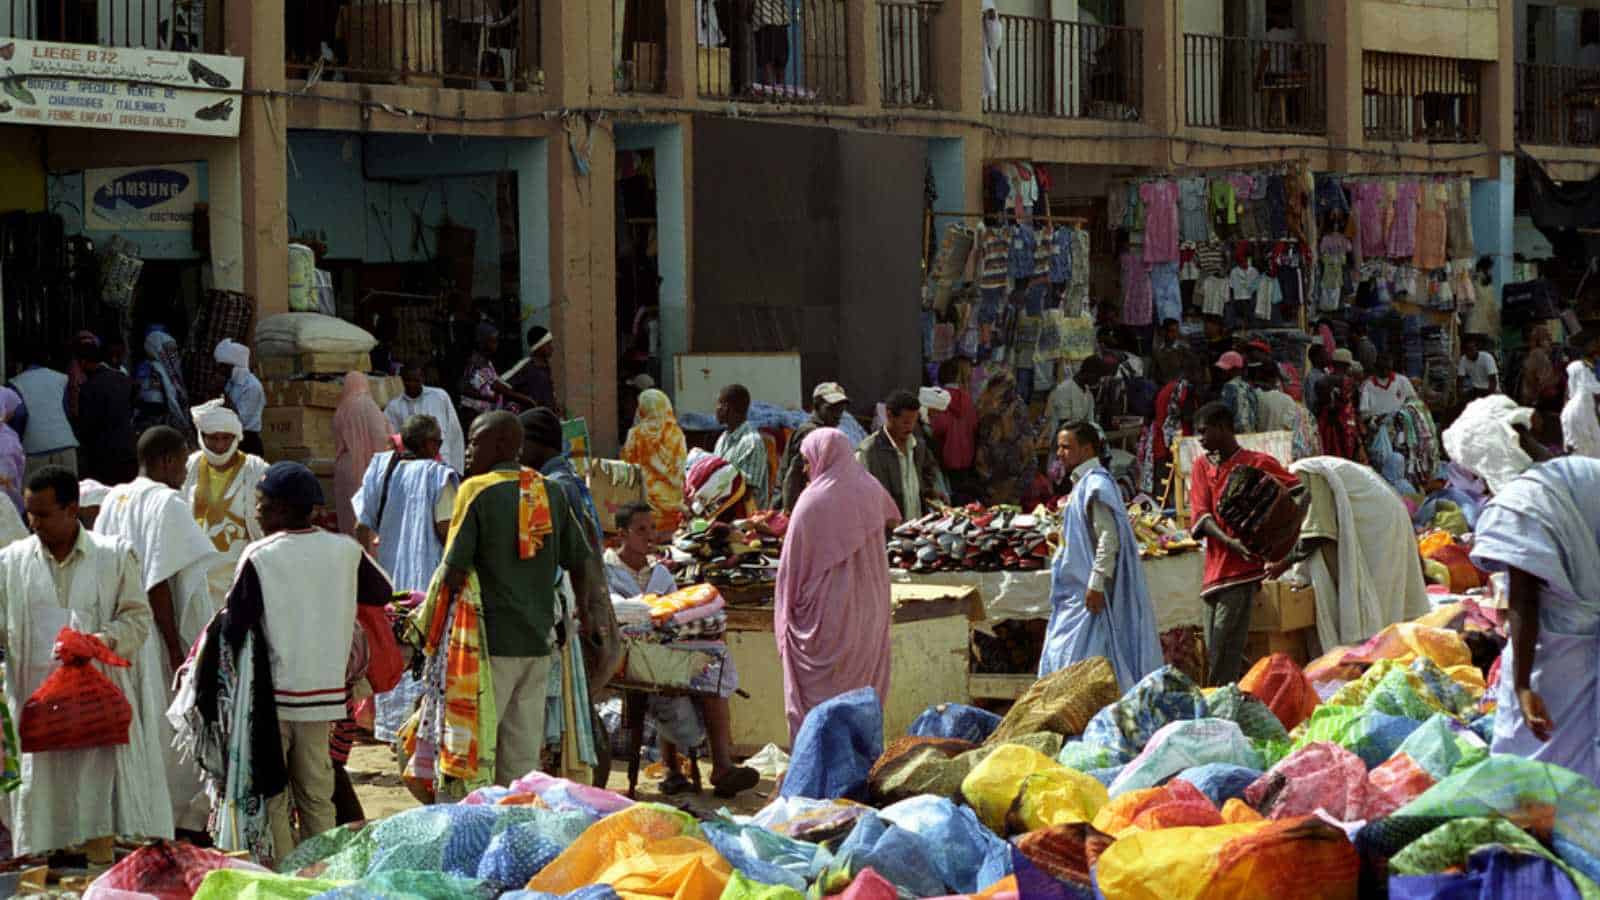 NOUAKCHOTT, MAURITANIA - JAN 5: Local people sell their staff at the market on January 5, 2006 in Nouakchott, Mauritania. The city market is an interesting place to visit.